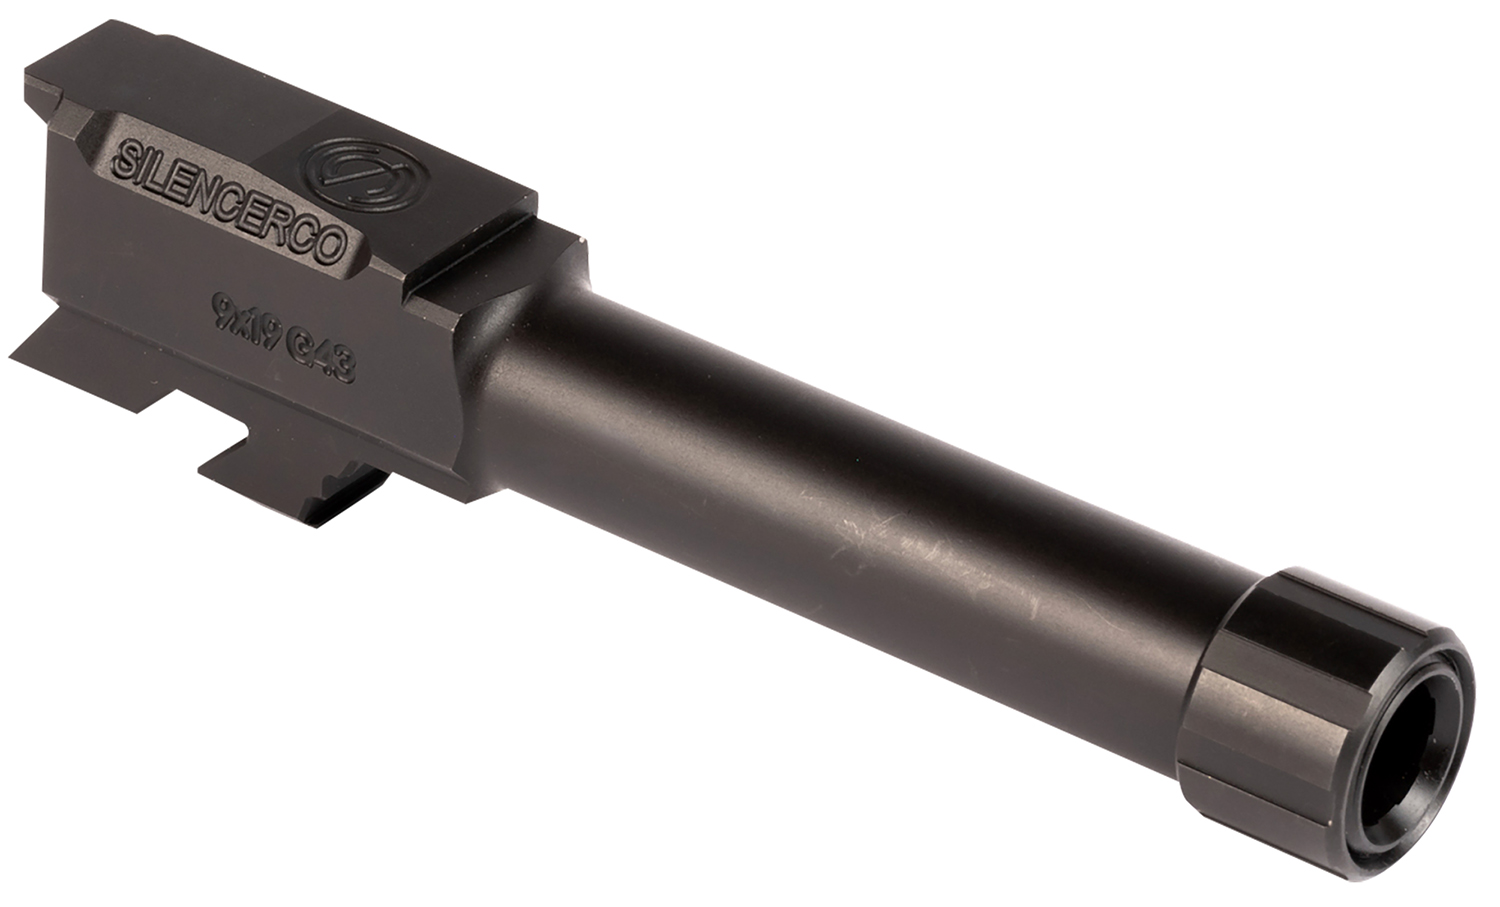 SilencerCo AC5049 Threaded Barrel 3.70" 9mm Luger, Black Nitride Stainless Steel, Fits Glock 43/43X